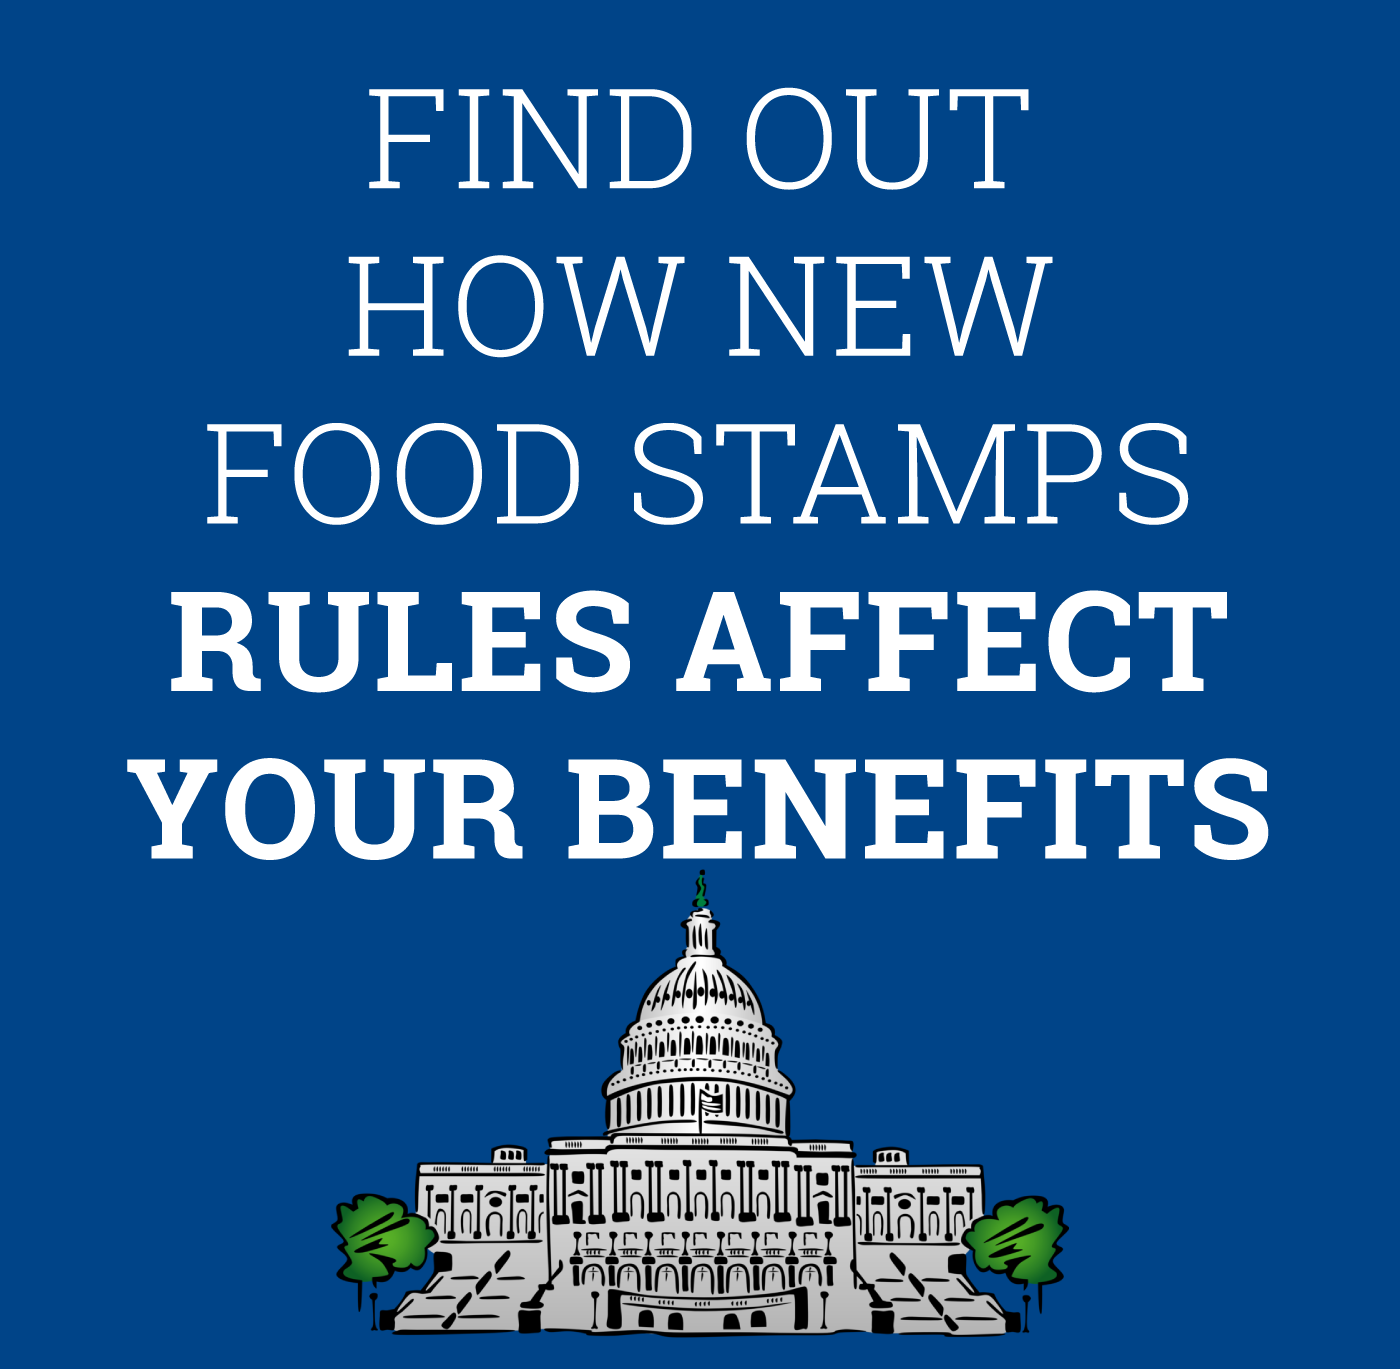 "new work requirements food stamps"